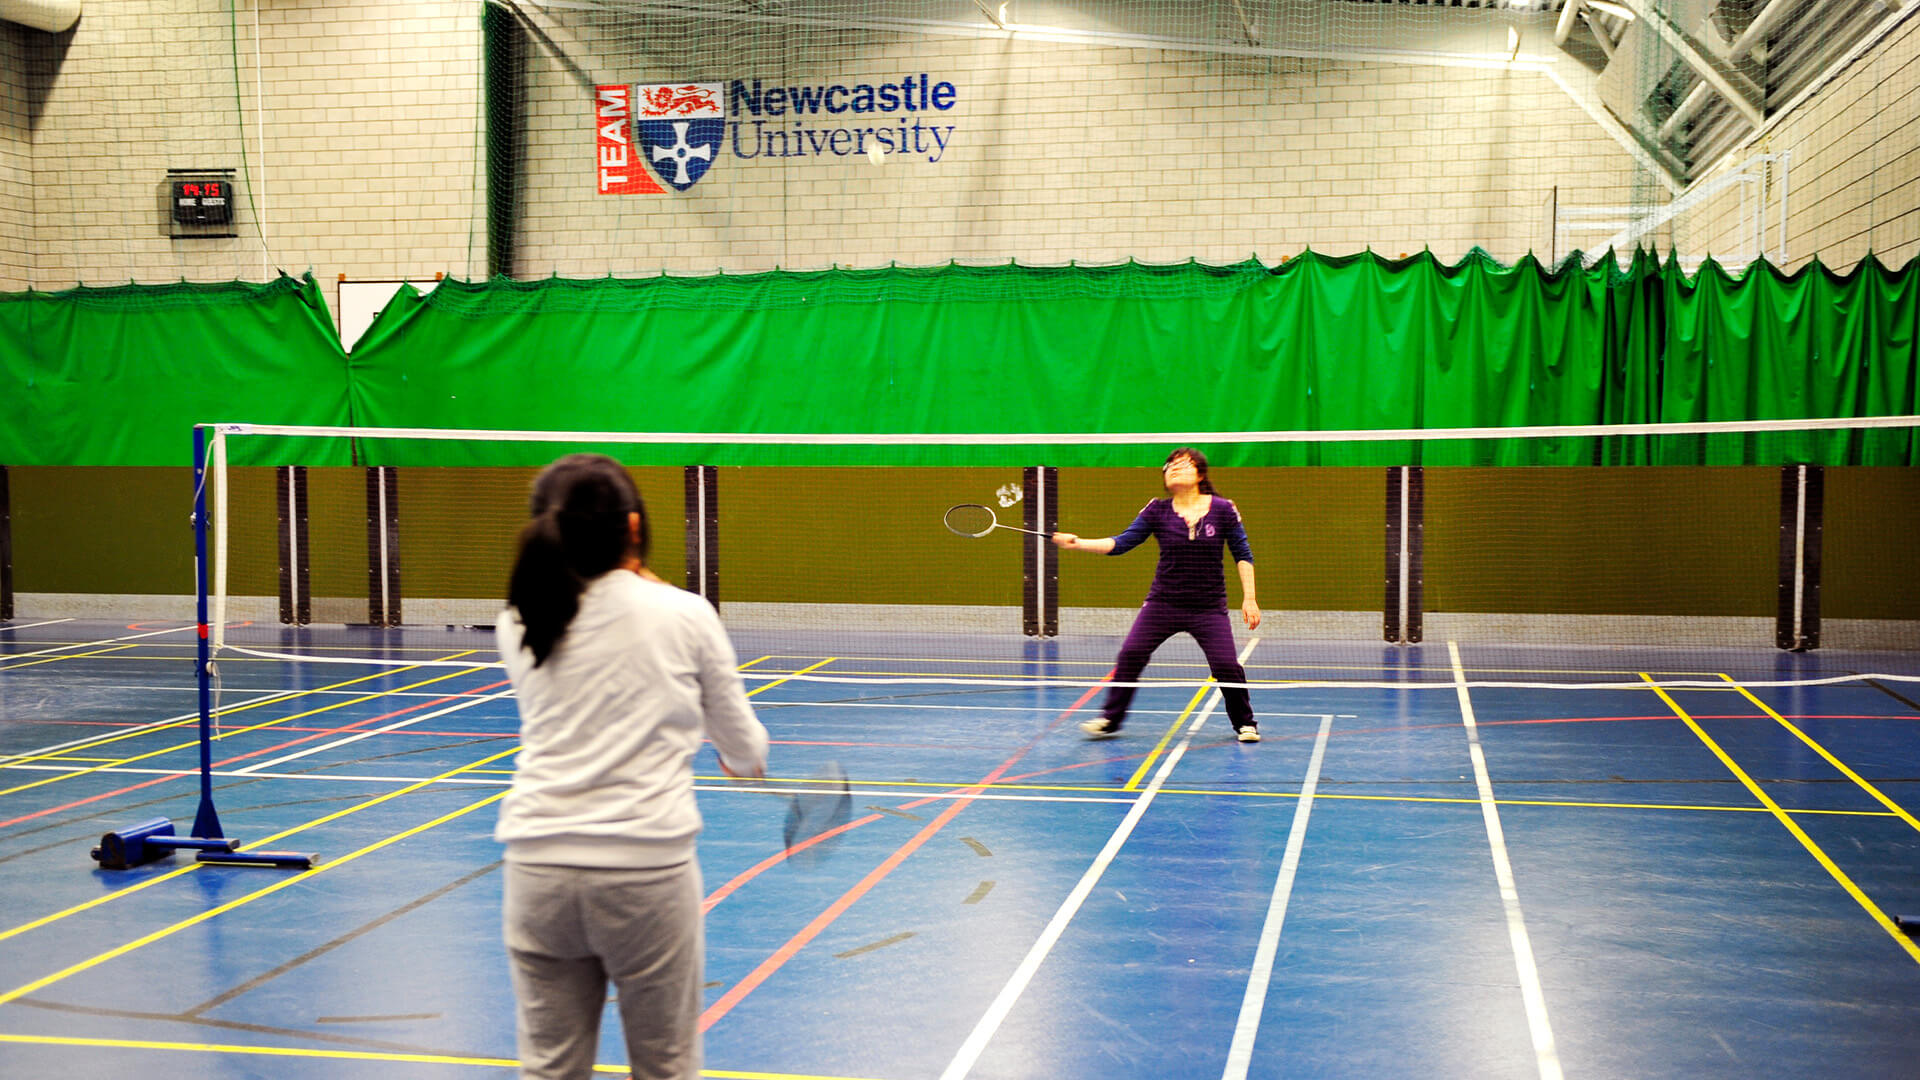 Students playing badminton at the Centre for Physical Recreation & Sport at Newcastle University